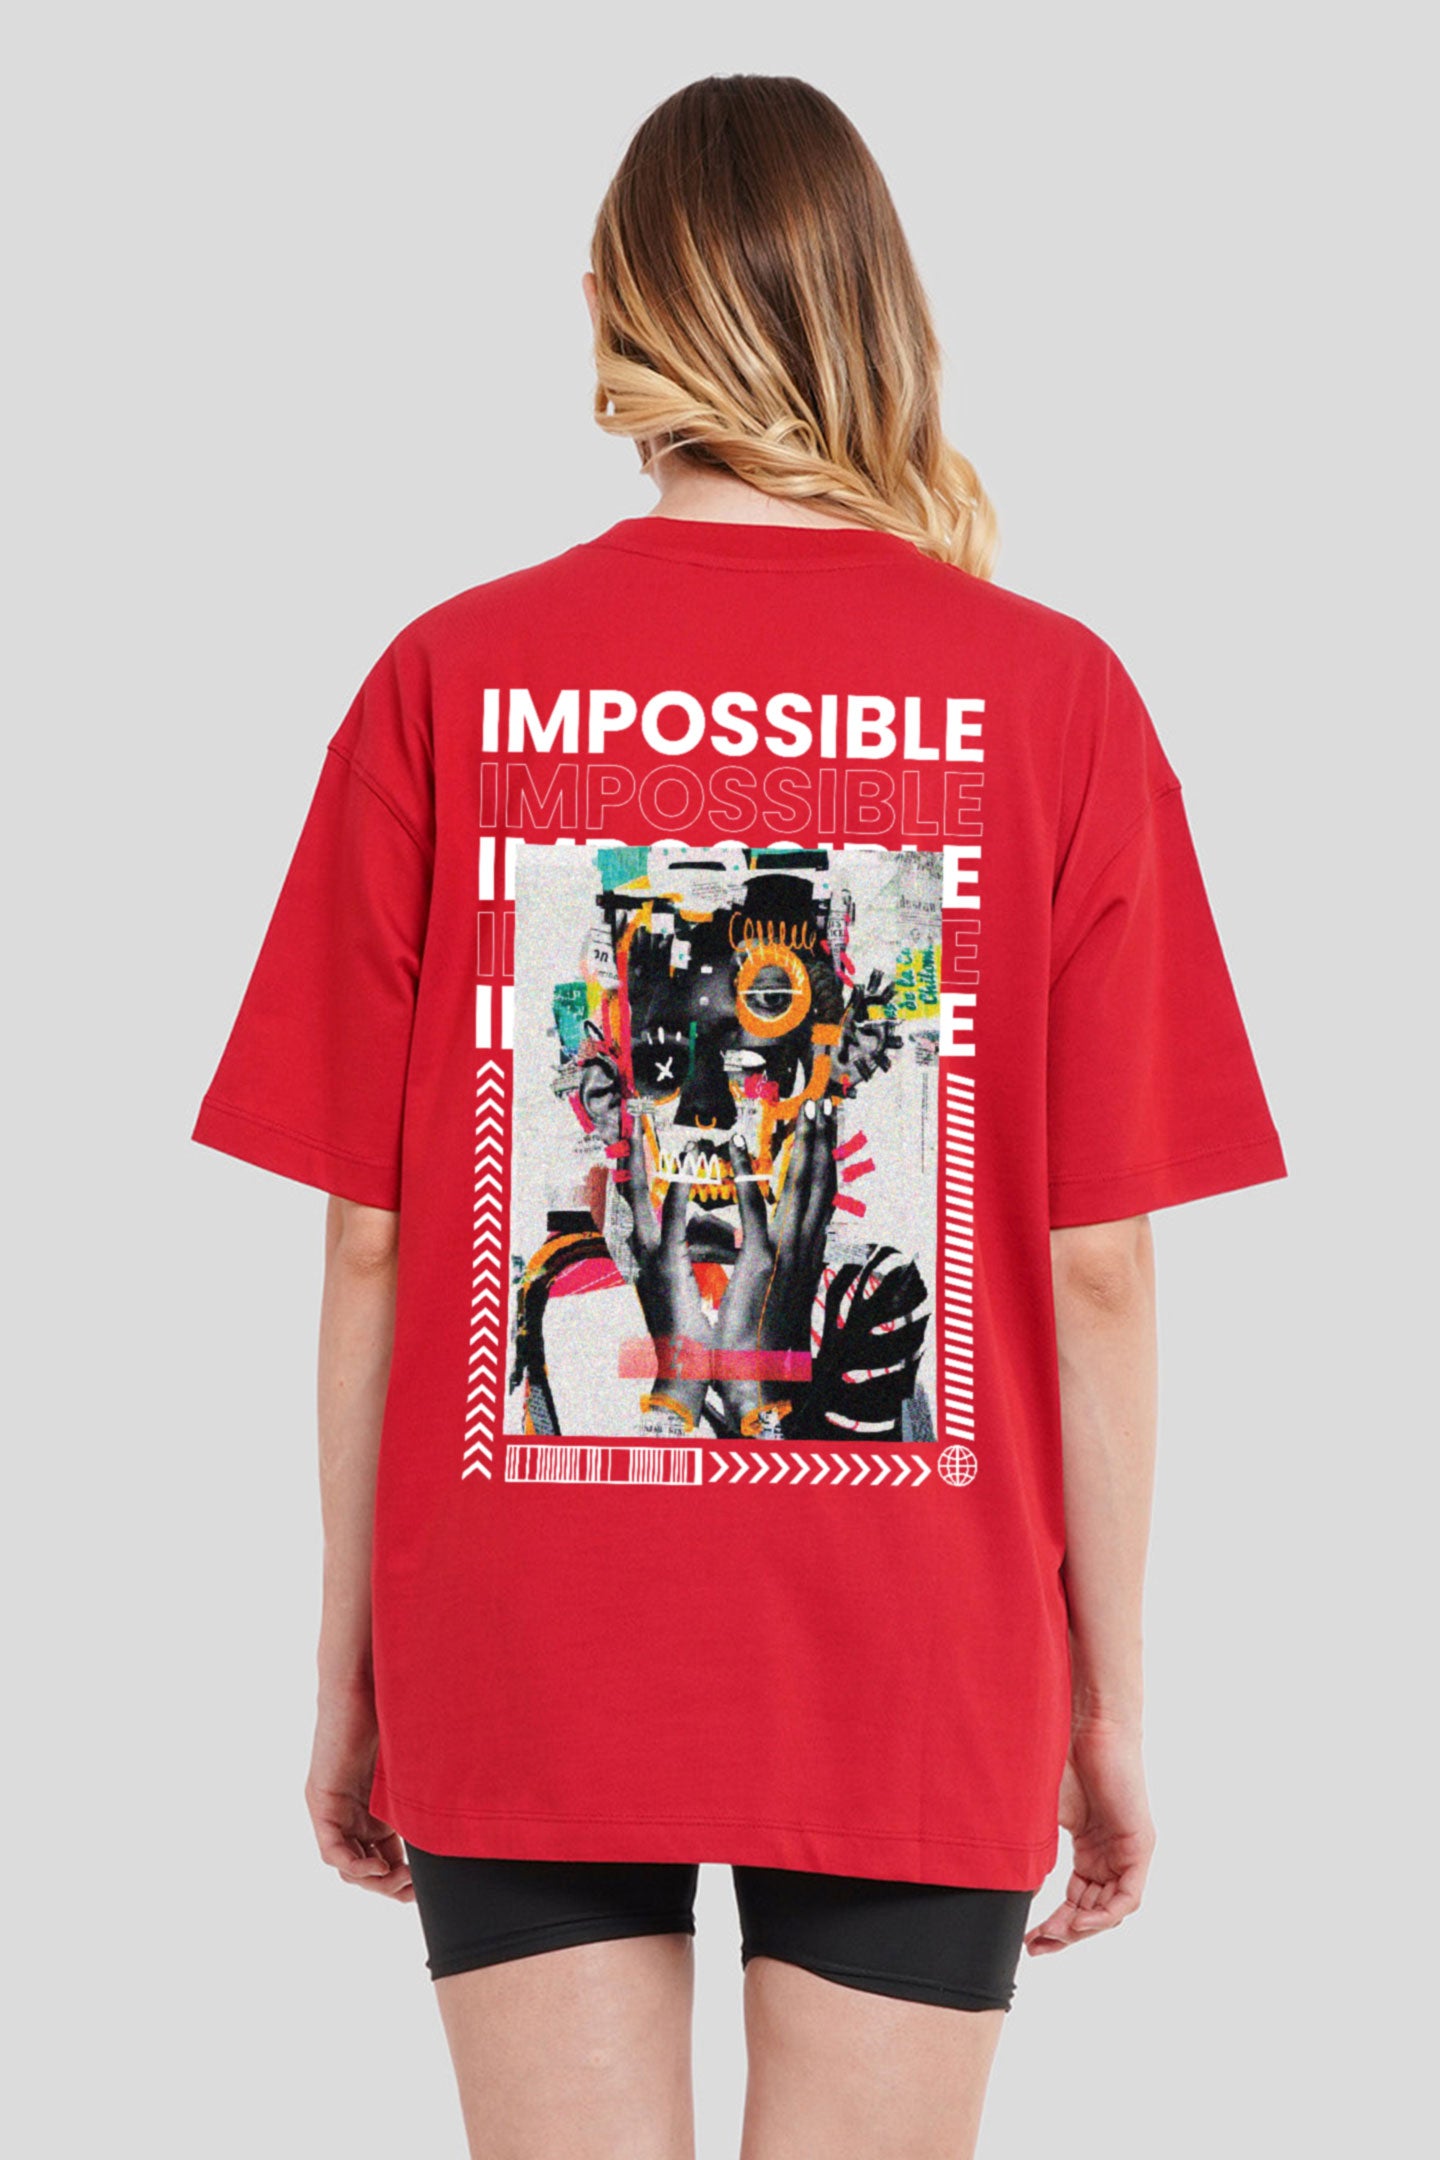 Impossible Red Printed T-Shirt Women Oversized Fit With Front And Back Design Pic 2